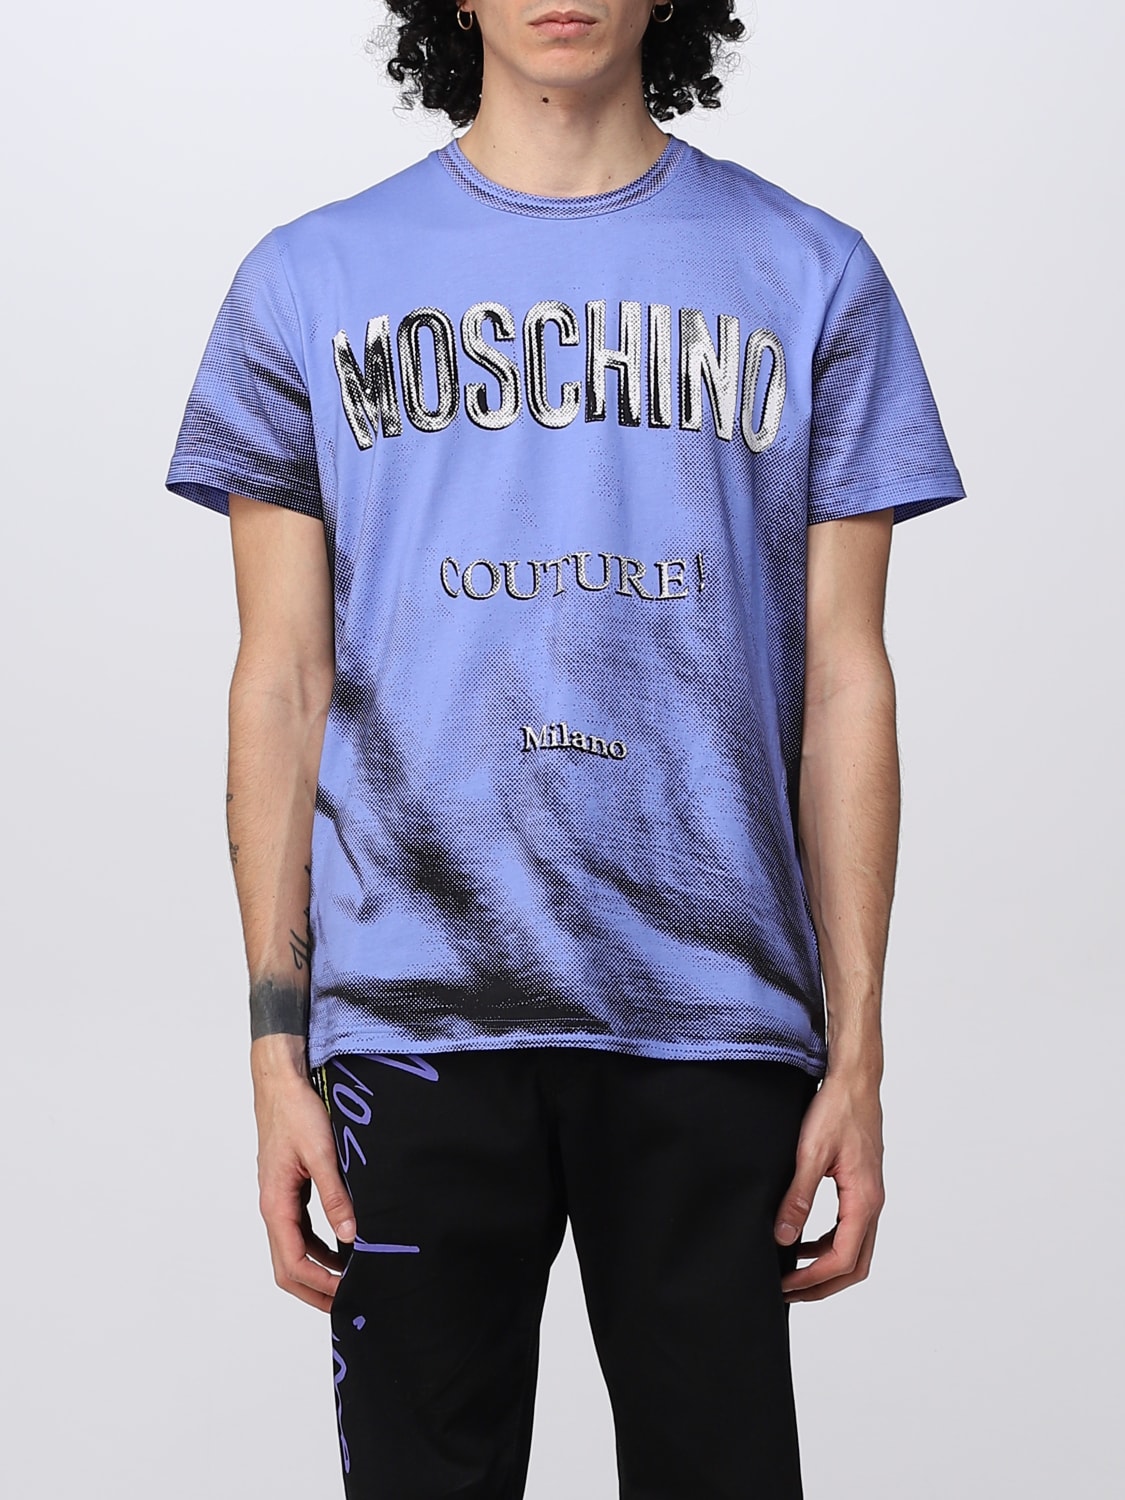 MOSCHINO COUTURE：Tシャツ メンズ - アジュール | GIGLIO.COM ...